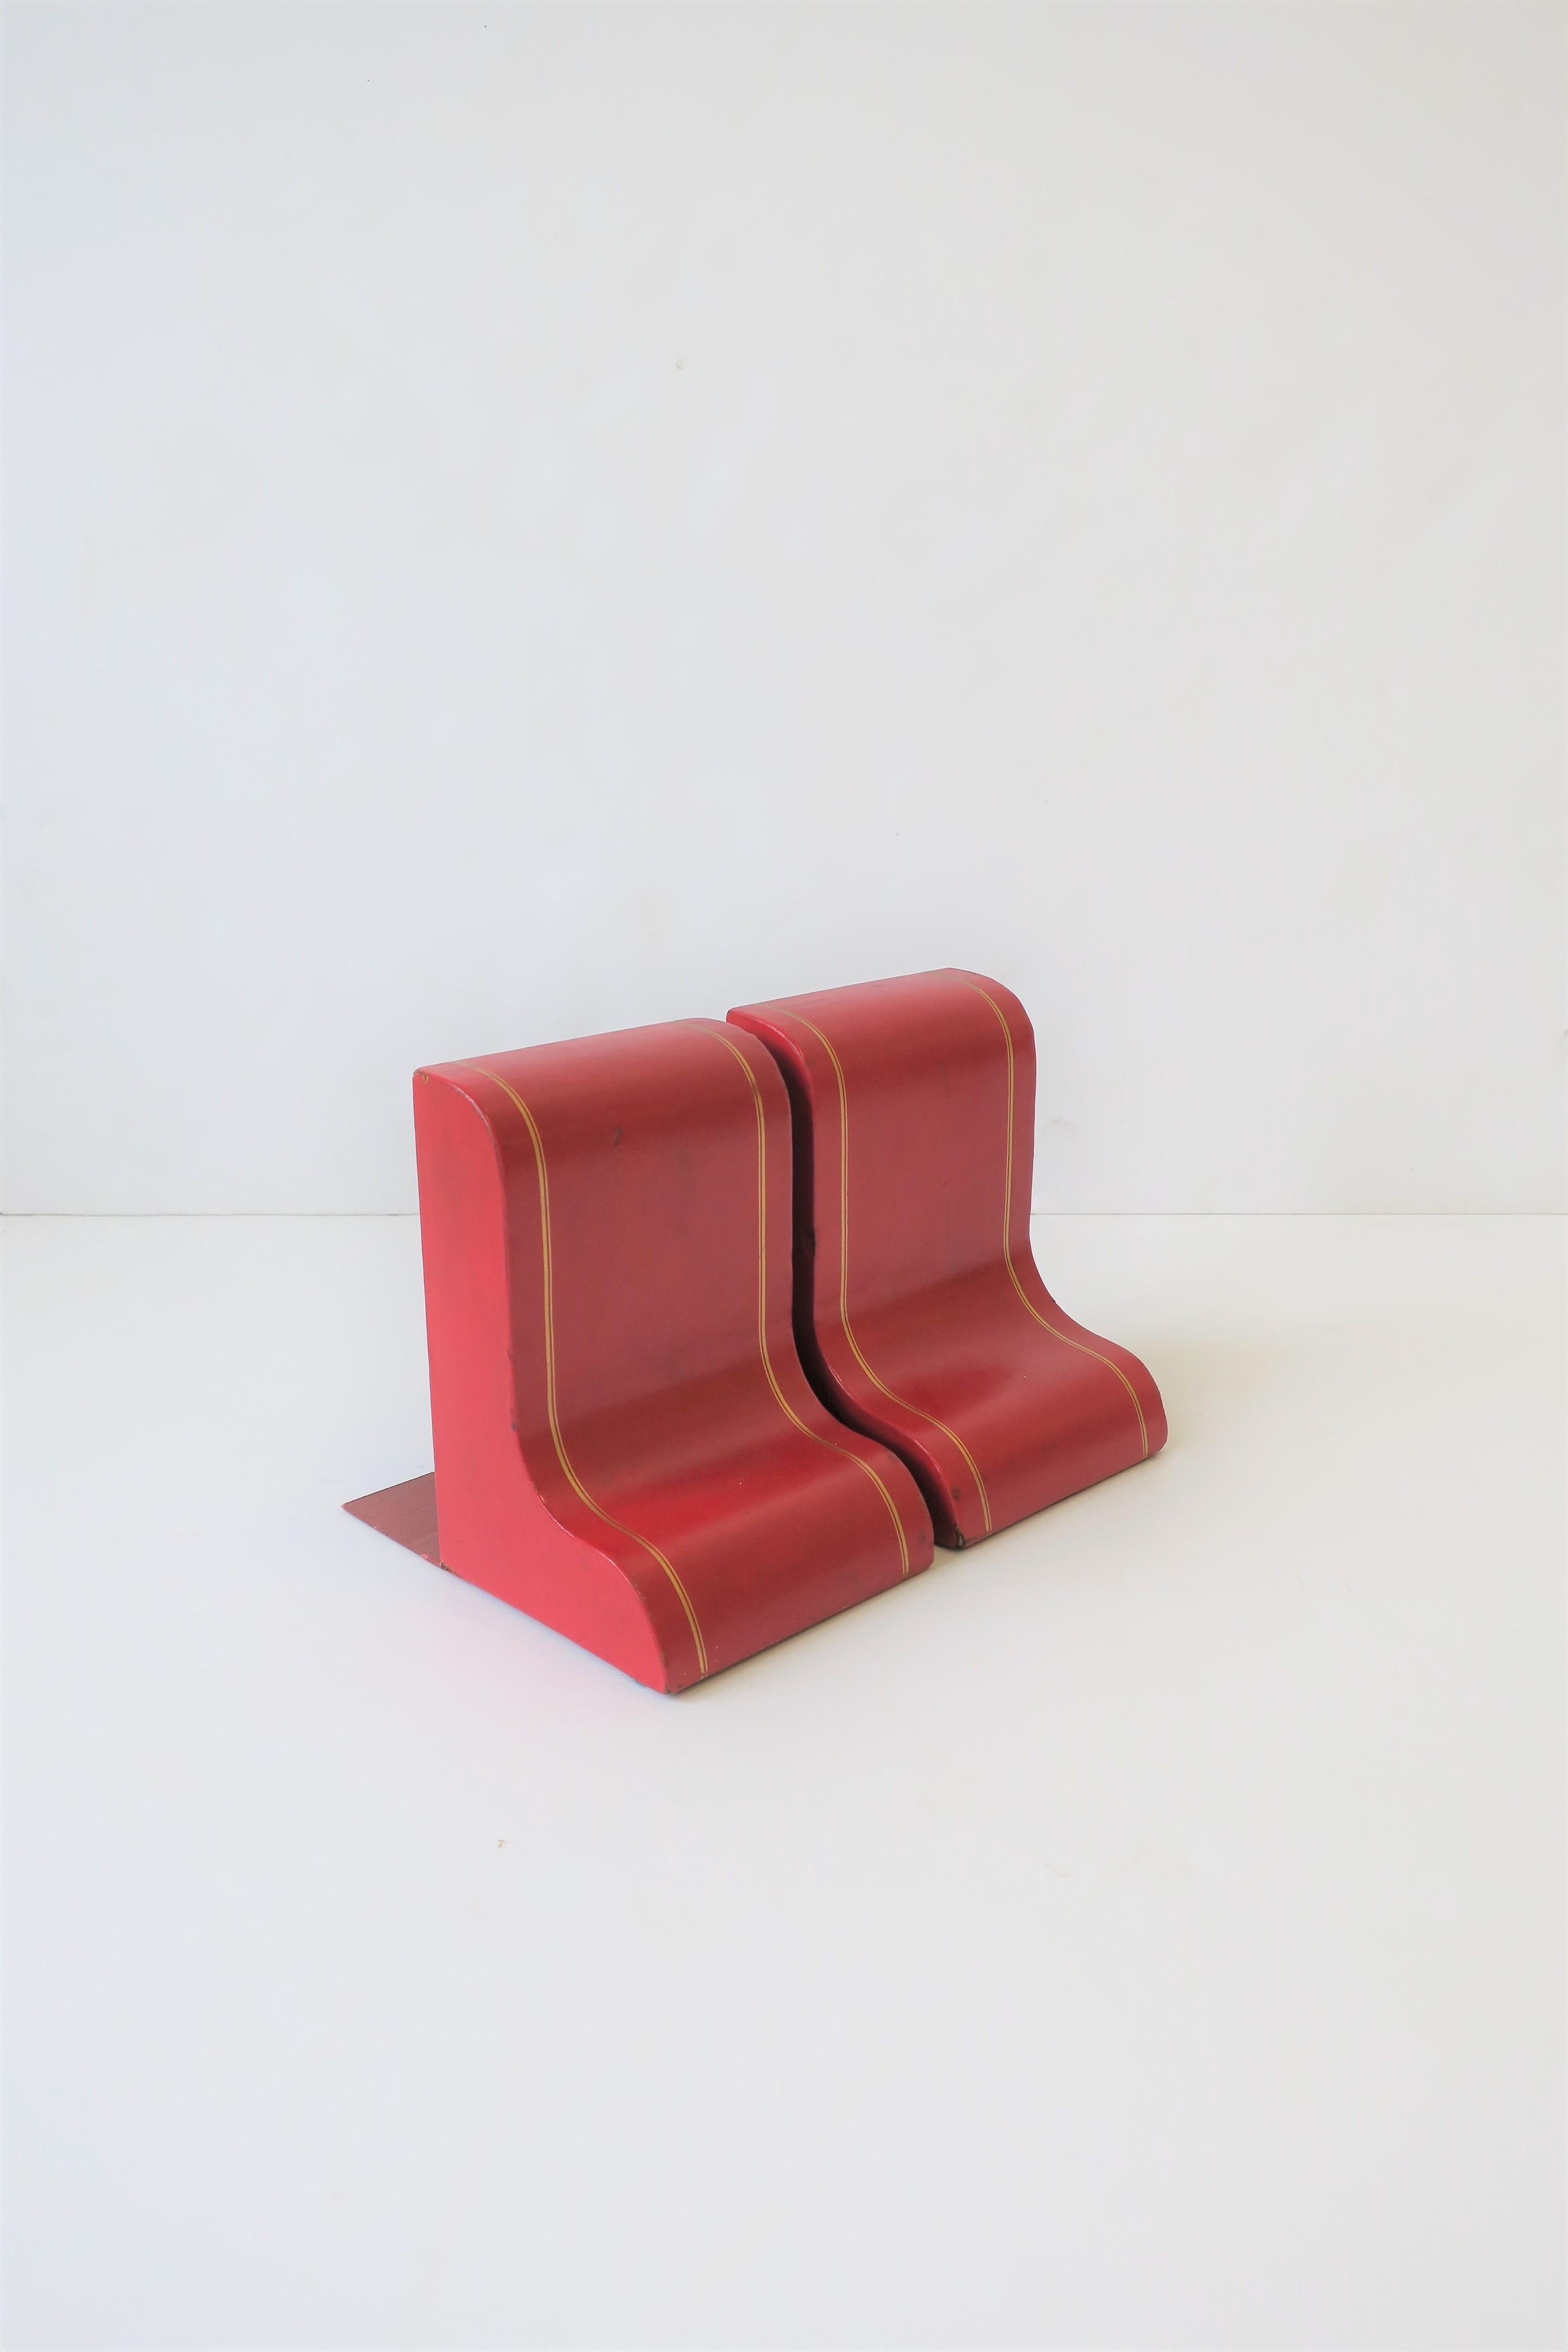 Italian Red Leather and Gold Bookends, Pair For Sale 5